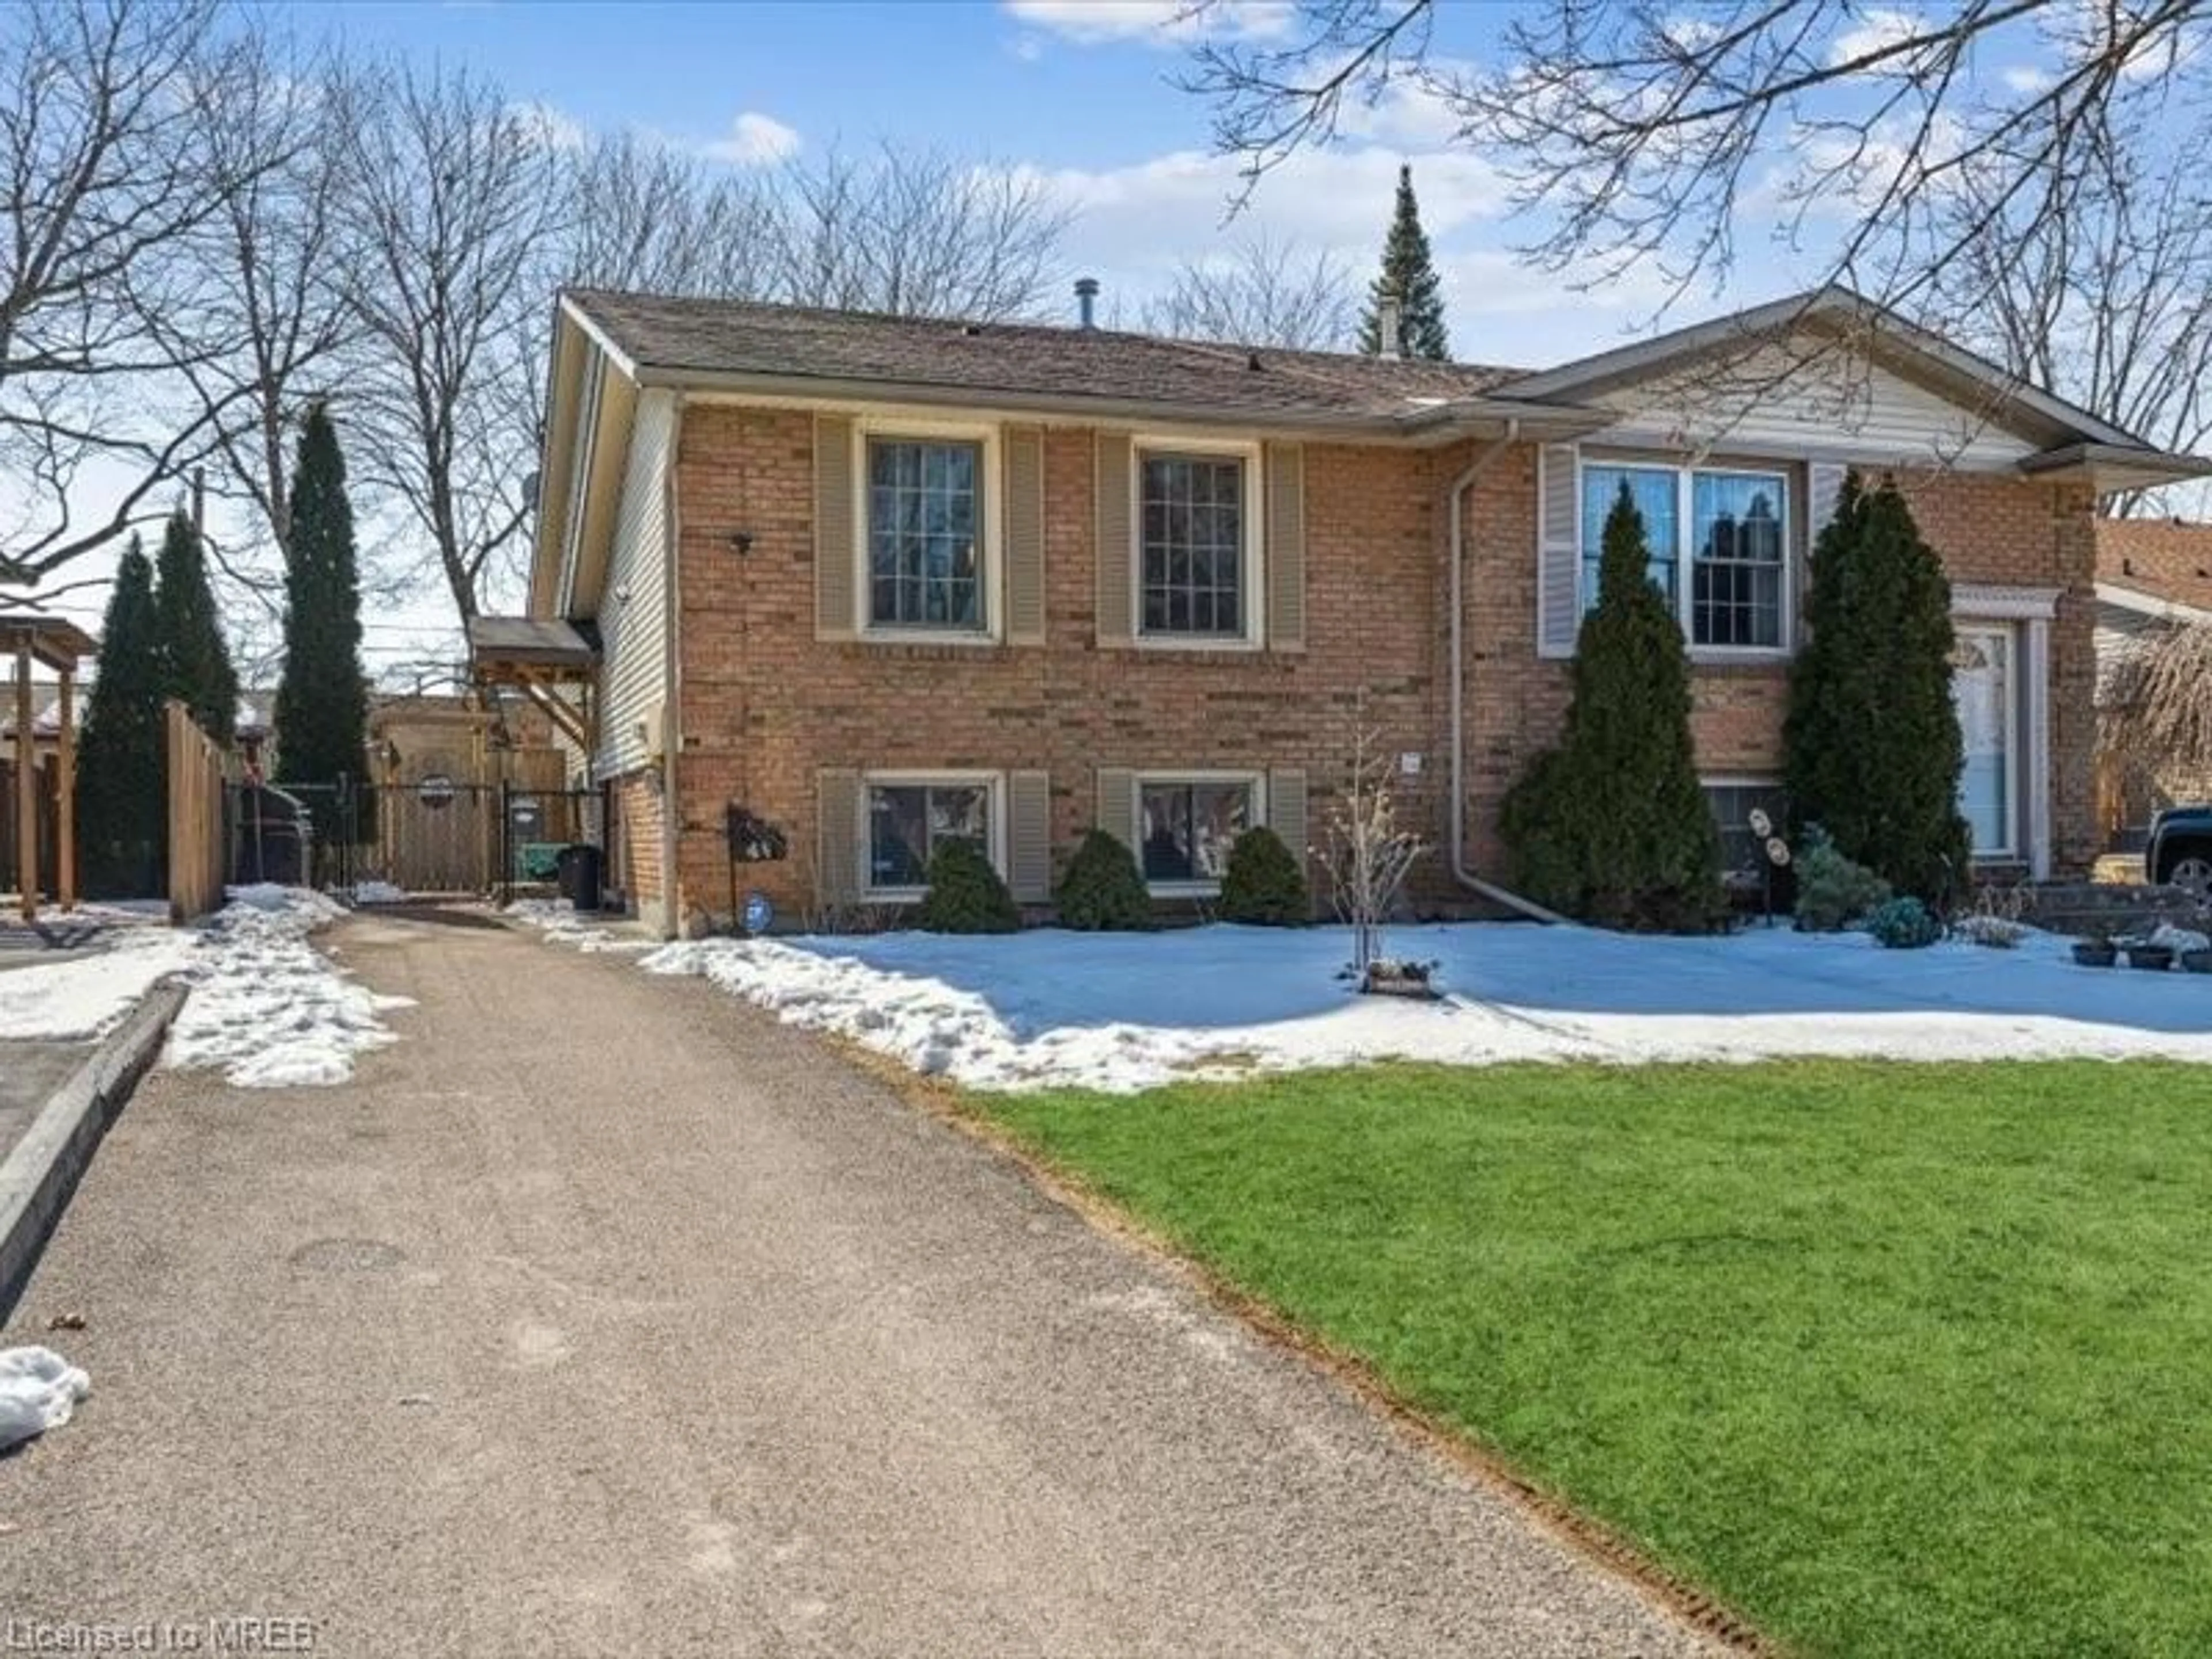 Home with brick exterior material for 4 1/2 Leaside Dr, St. Catharines Ontario L2M 4G5